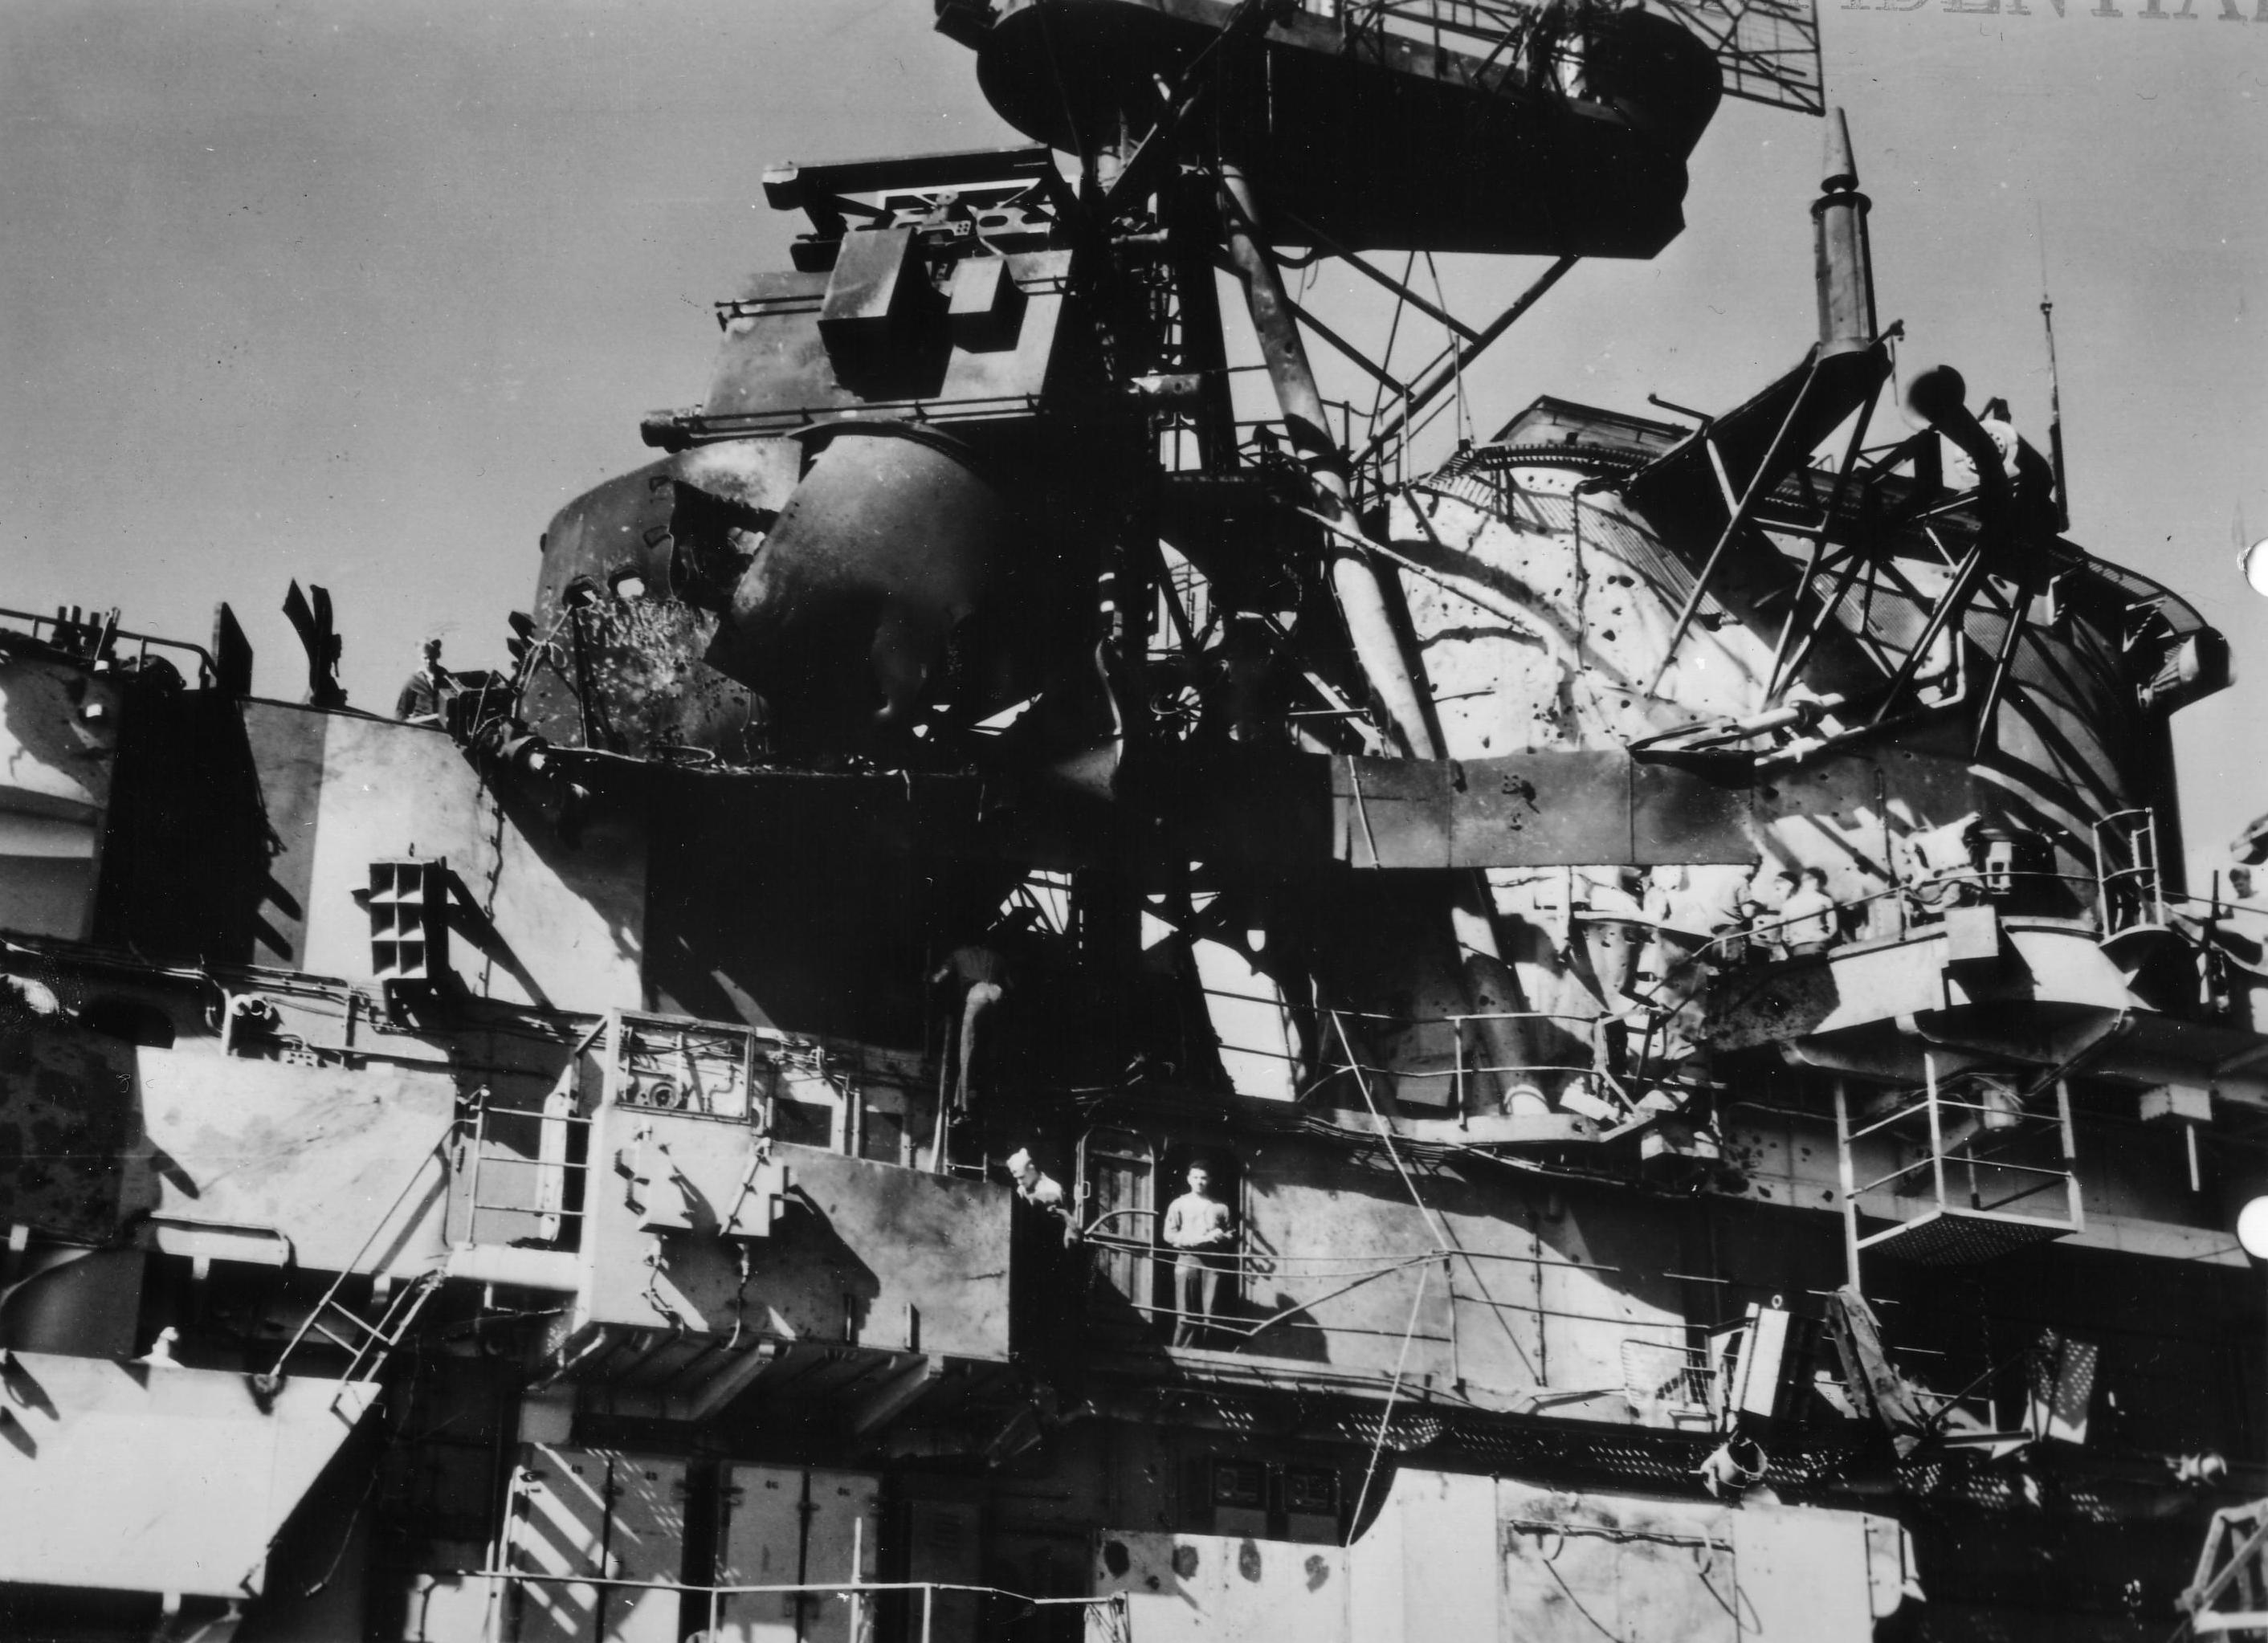 Photo taken at Puget Sound Naval Shipyard, Bremerton, Washington, United States, Feb 1945 showing island damage to USS Ticonderoga as the result of a direct hit by a special attack aircraft off Formosa (Taiwan).